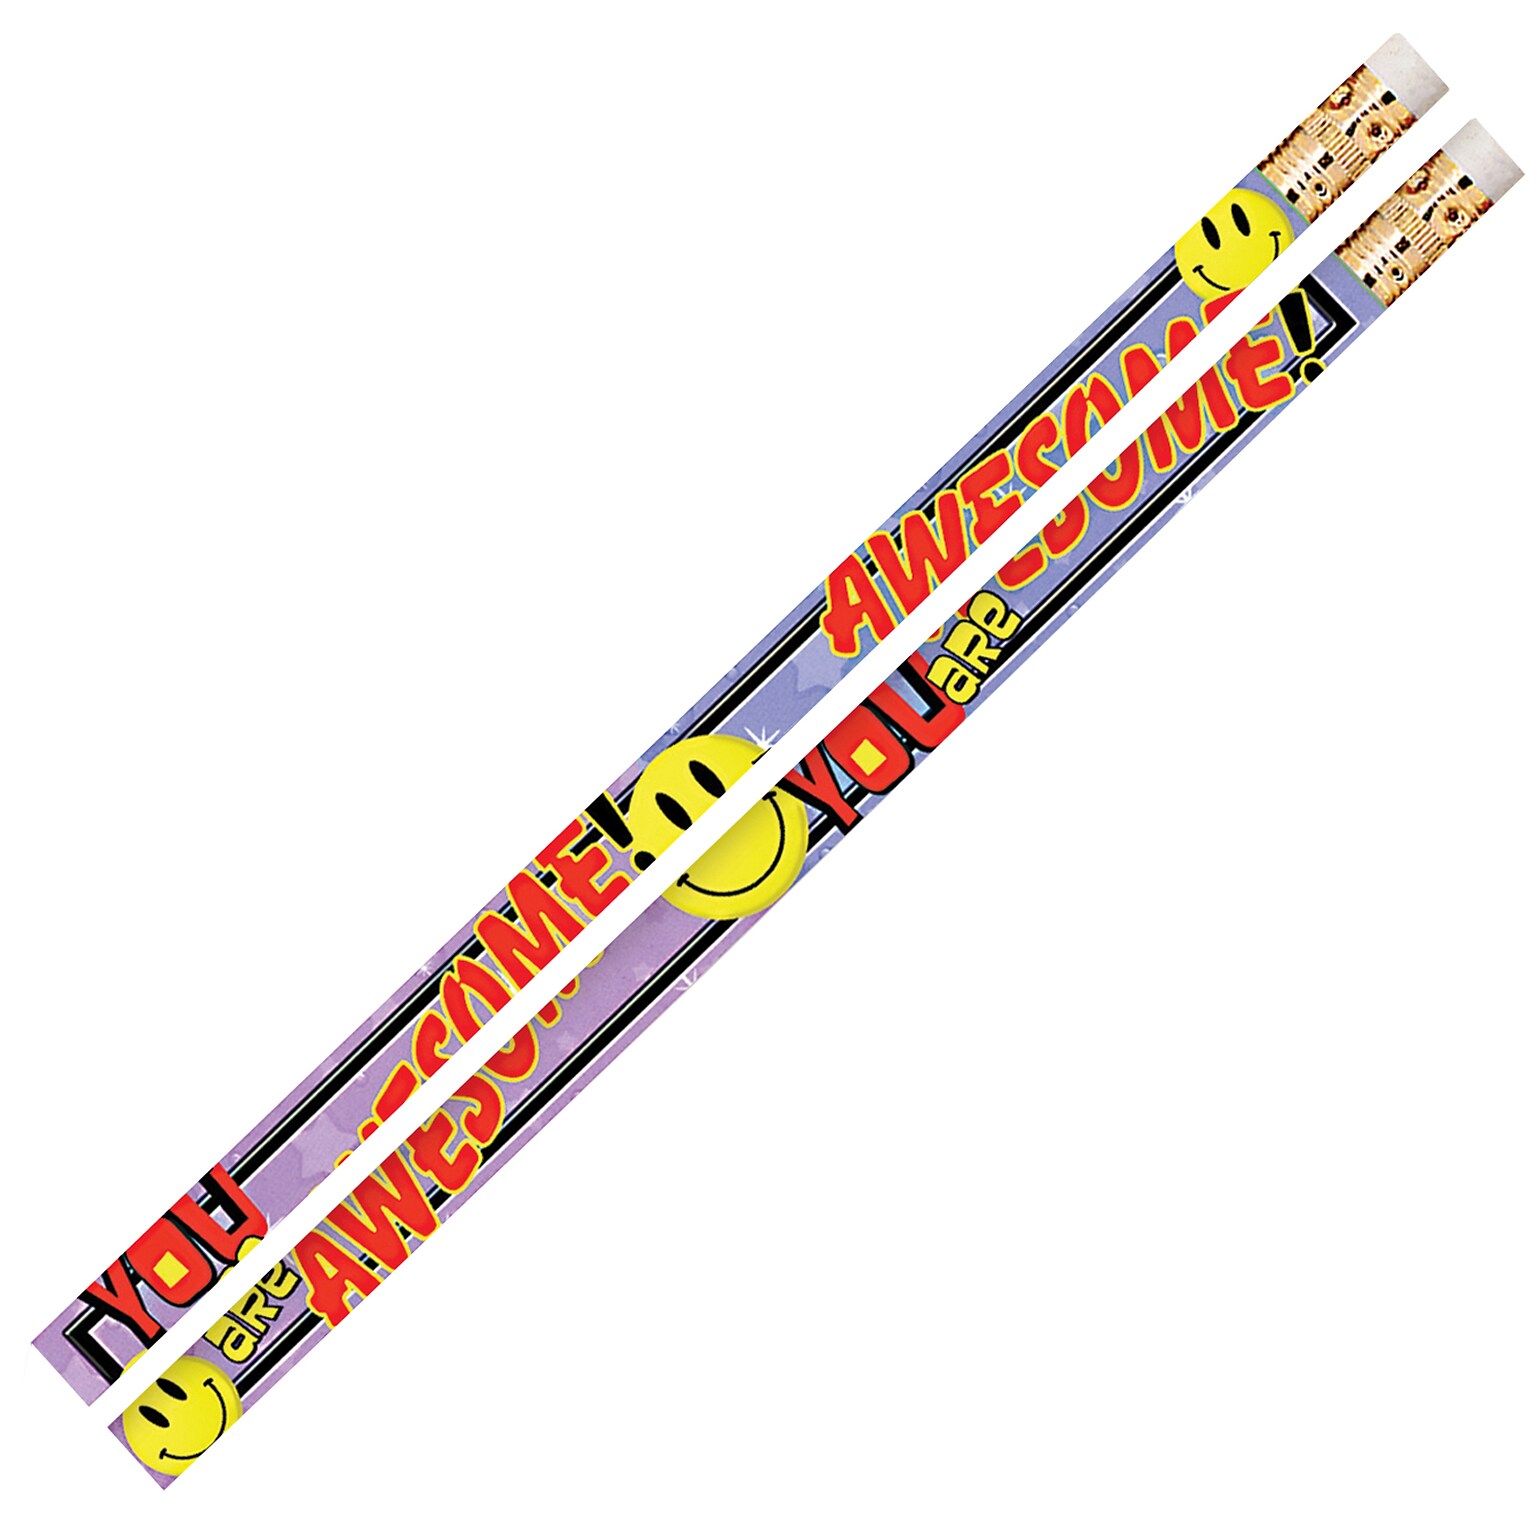 Musgrave Pencil Company You Are Awesome Motivational Pencils, #2 Lead, 12 Per Pack, 12 Packs (MUS2473D-12)